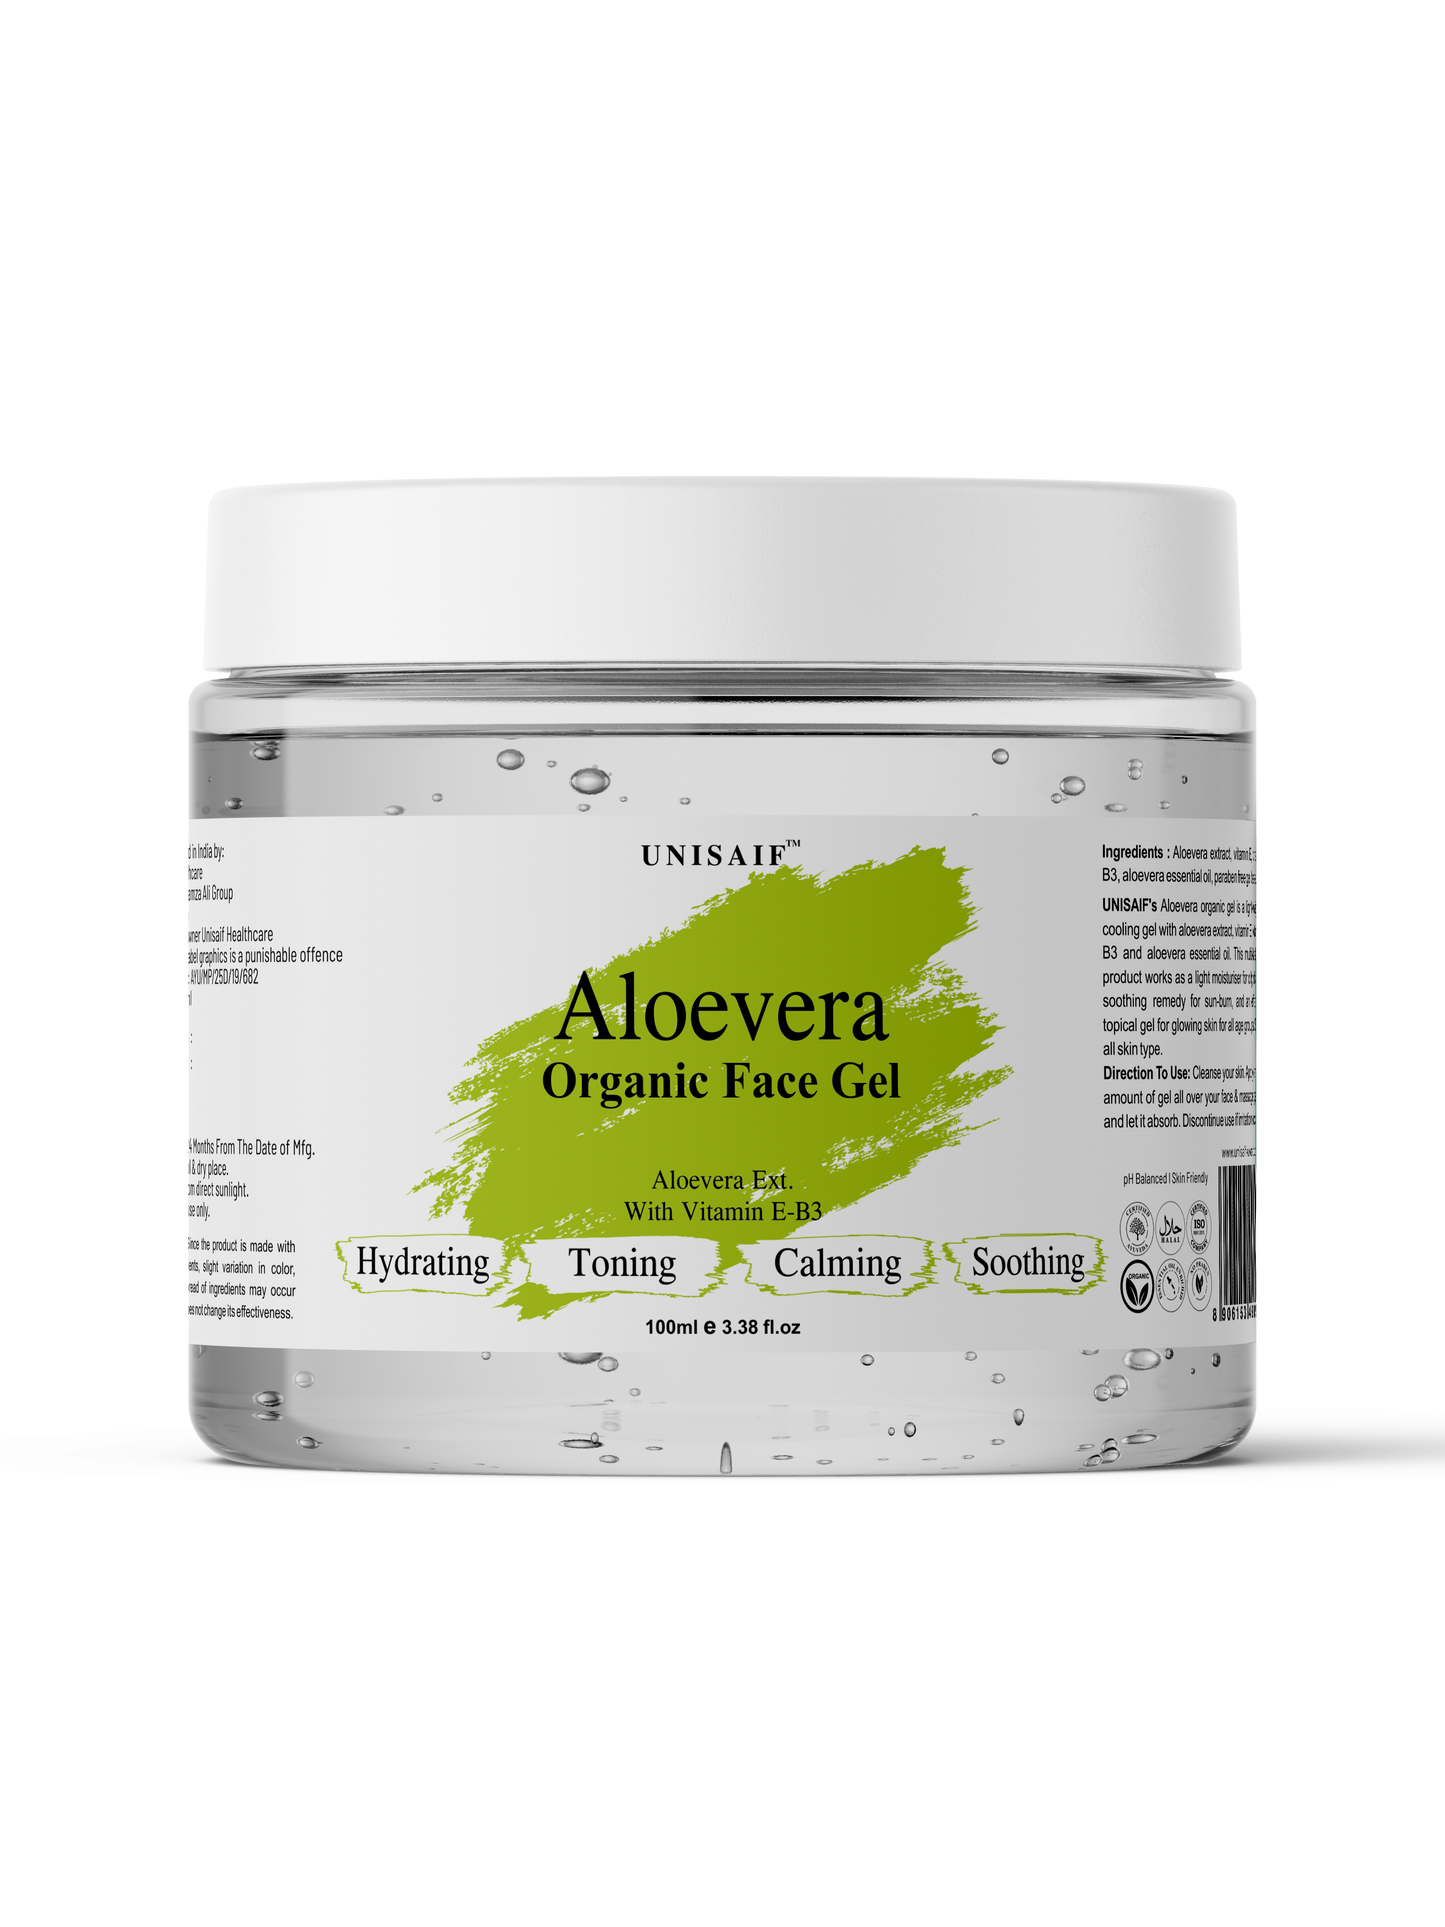 Aloevera Organic Facial Gel (100 ml) |Hydrating| Acne Prevention| Calming| Soothing| NO PARABEN